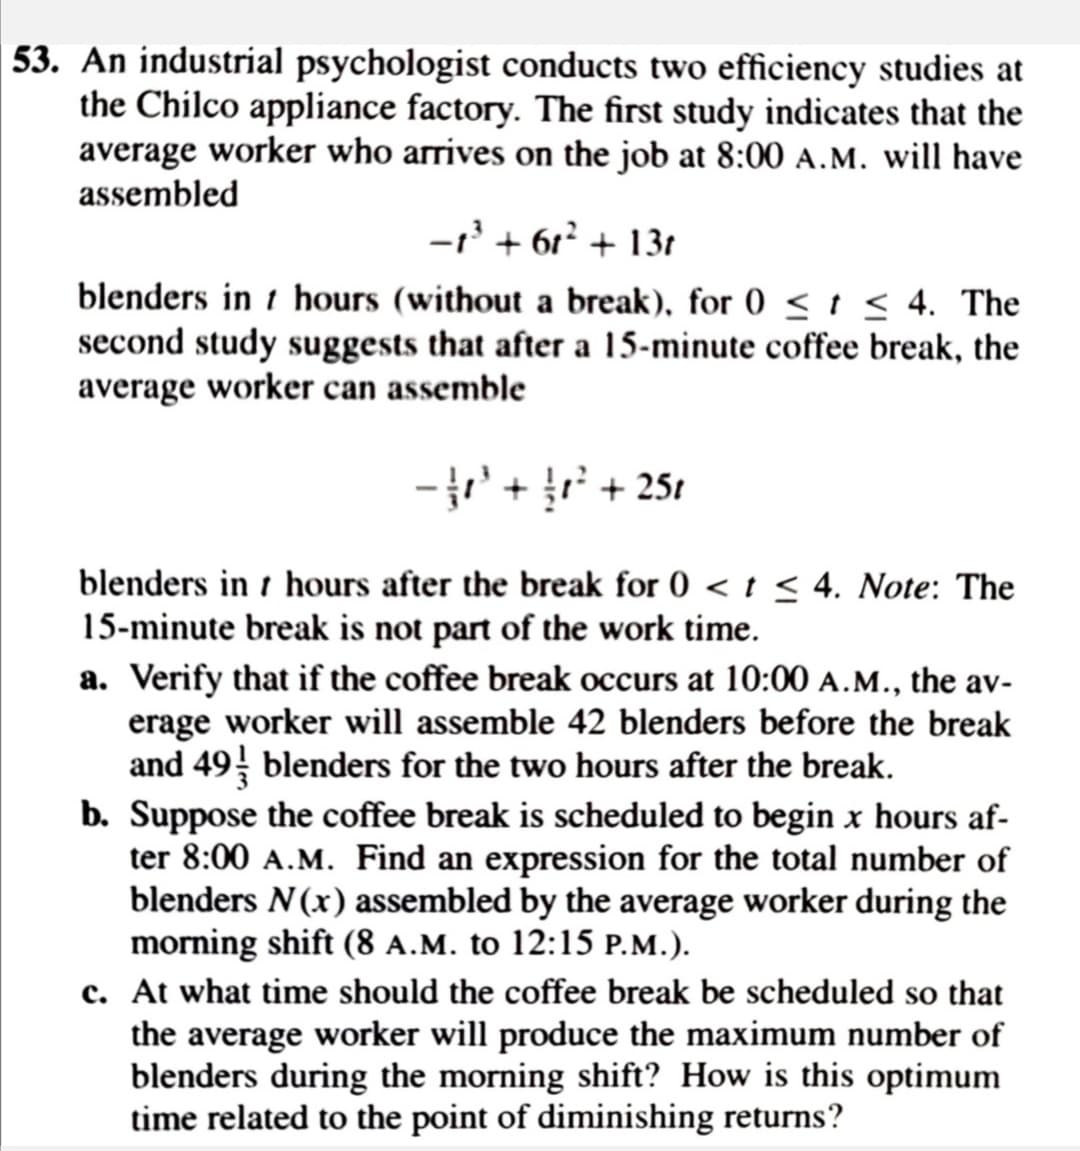 53. An industrial psychologist conducts two efficiency studies at
the Chilco appliance factory. The first study indicates that the
average worker who arrives on the job at 8:00 A.M. will have
assembled
-' + 6r² + 13t
blenders in t hours (without a break), for 0 < t < 4. The
second study suggests that after a 15-minute coffee break, the
average worker can assemble
- + + 251
blenders in t hours after the break for 0 < t < 4. Note: The
15-minute break is not part of the work time.
a. Verify that if the coffee break occurs at 10:00 A.M., the av-
erage worker will assemble 42 blenders before the break
and 49 blenders for the two hours after the break.
b. Suppose the coffee break is scheduled to begin x hours af-
ter 8:00 A.M. Find an expression for the total number of
blenders N(x) assembled by the average worker during the
morning shift (8 A.M. to 12:15 P.M.).
c. At what time should the coffee break be scheduled so that
the average worker will produce the maximum number of
blenders during the morning shift? How is this optimum
time related to the point of diminishing returns?
